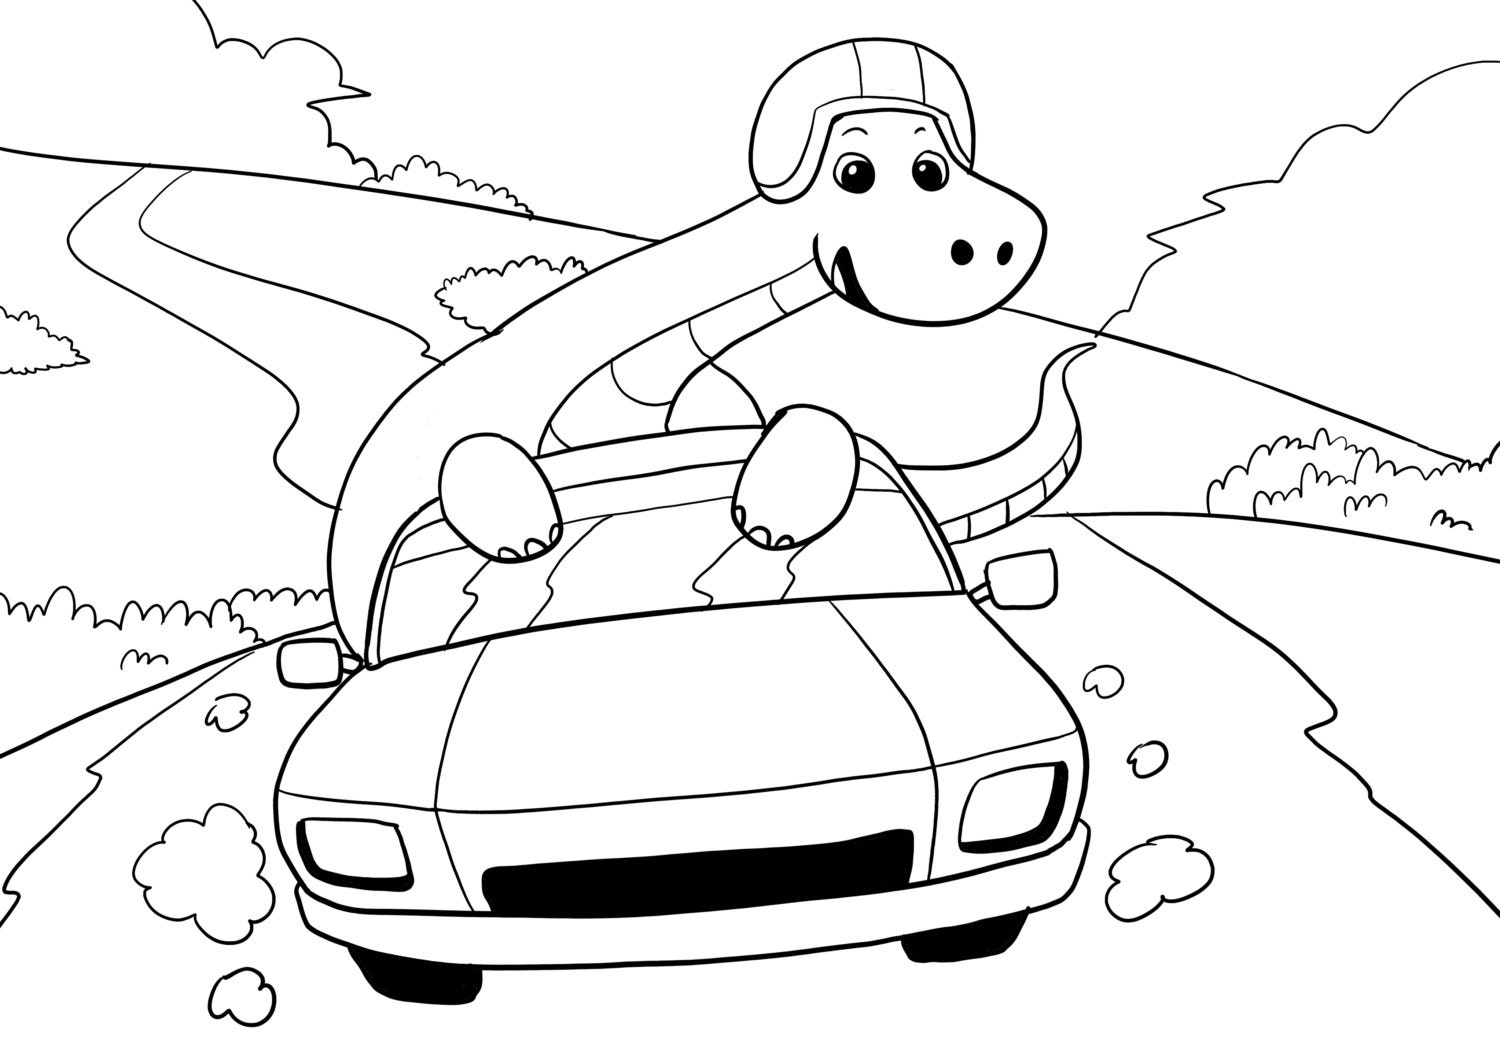 Race Car Coloring Pages For Adults - Full Force Race Car Coloring Pages